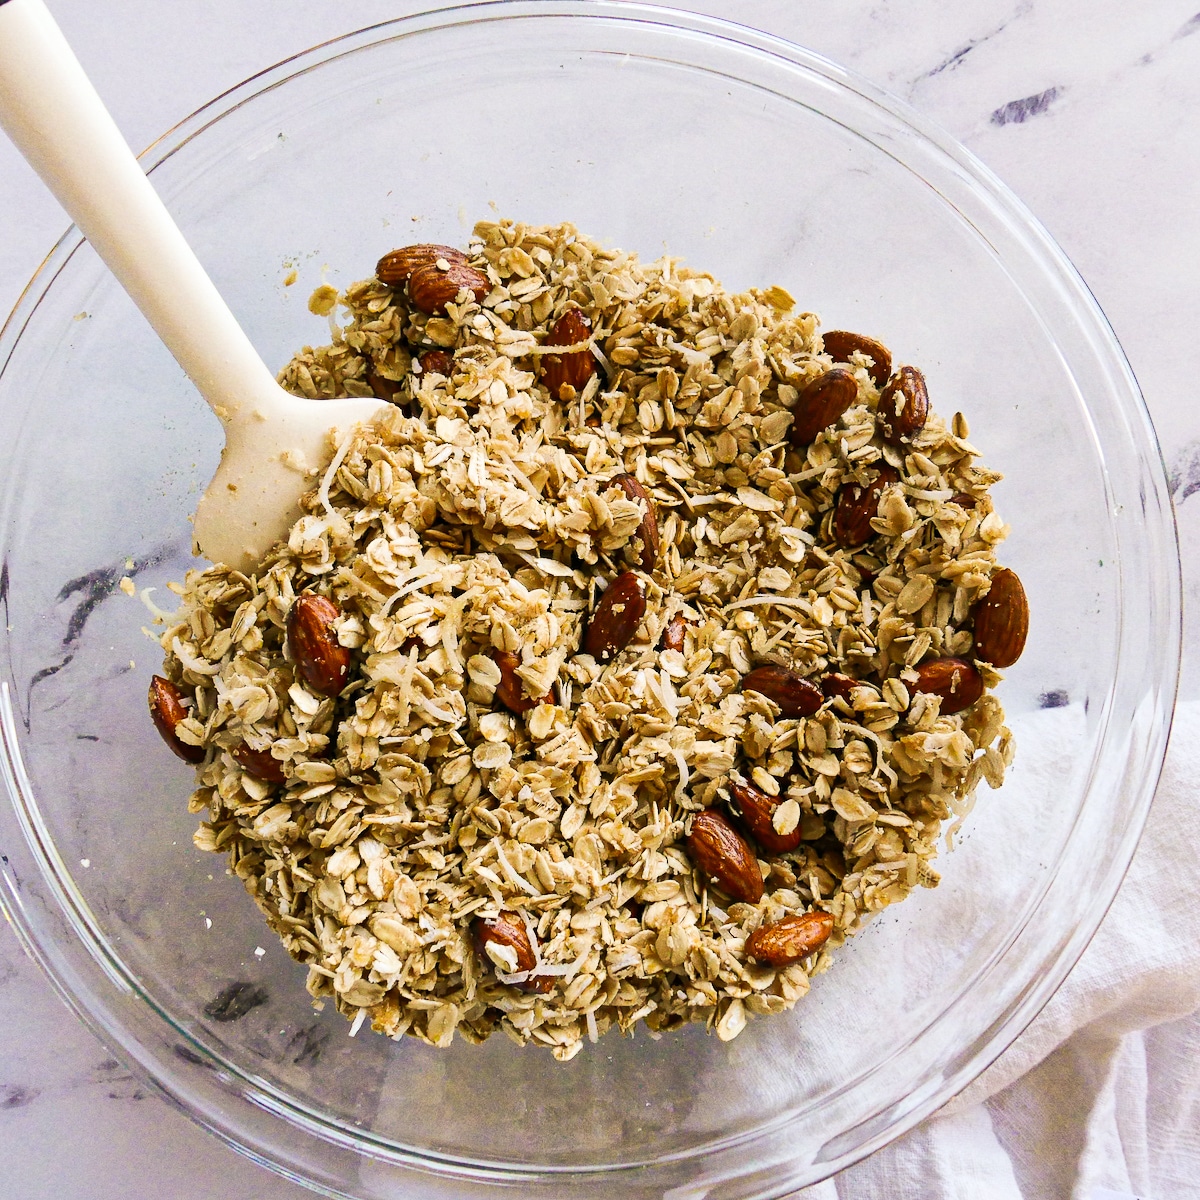 Oil and maple syrup mixture added to dry oats mixture in a bowl.